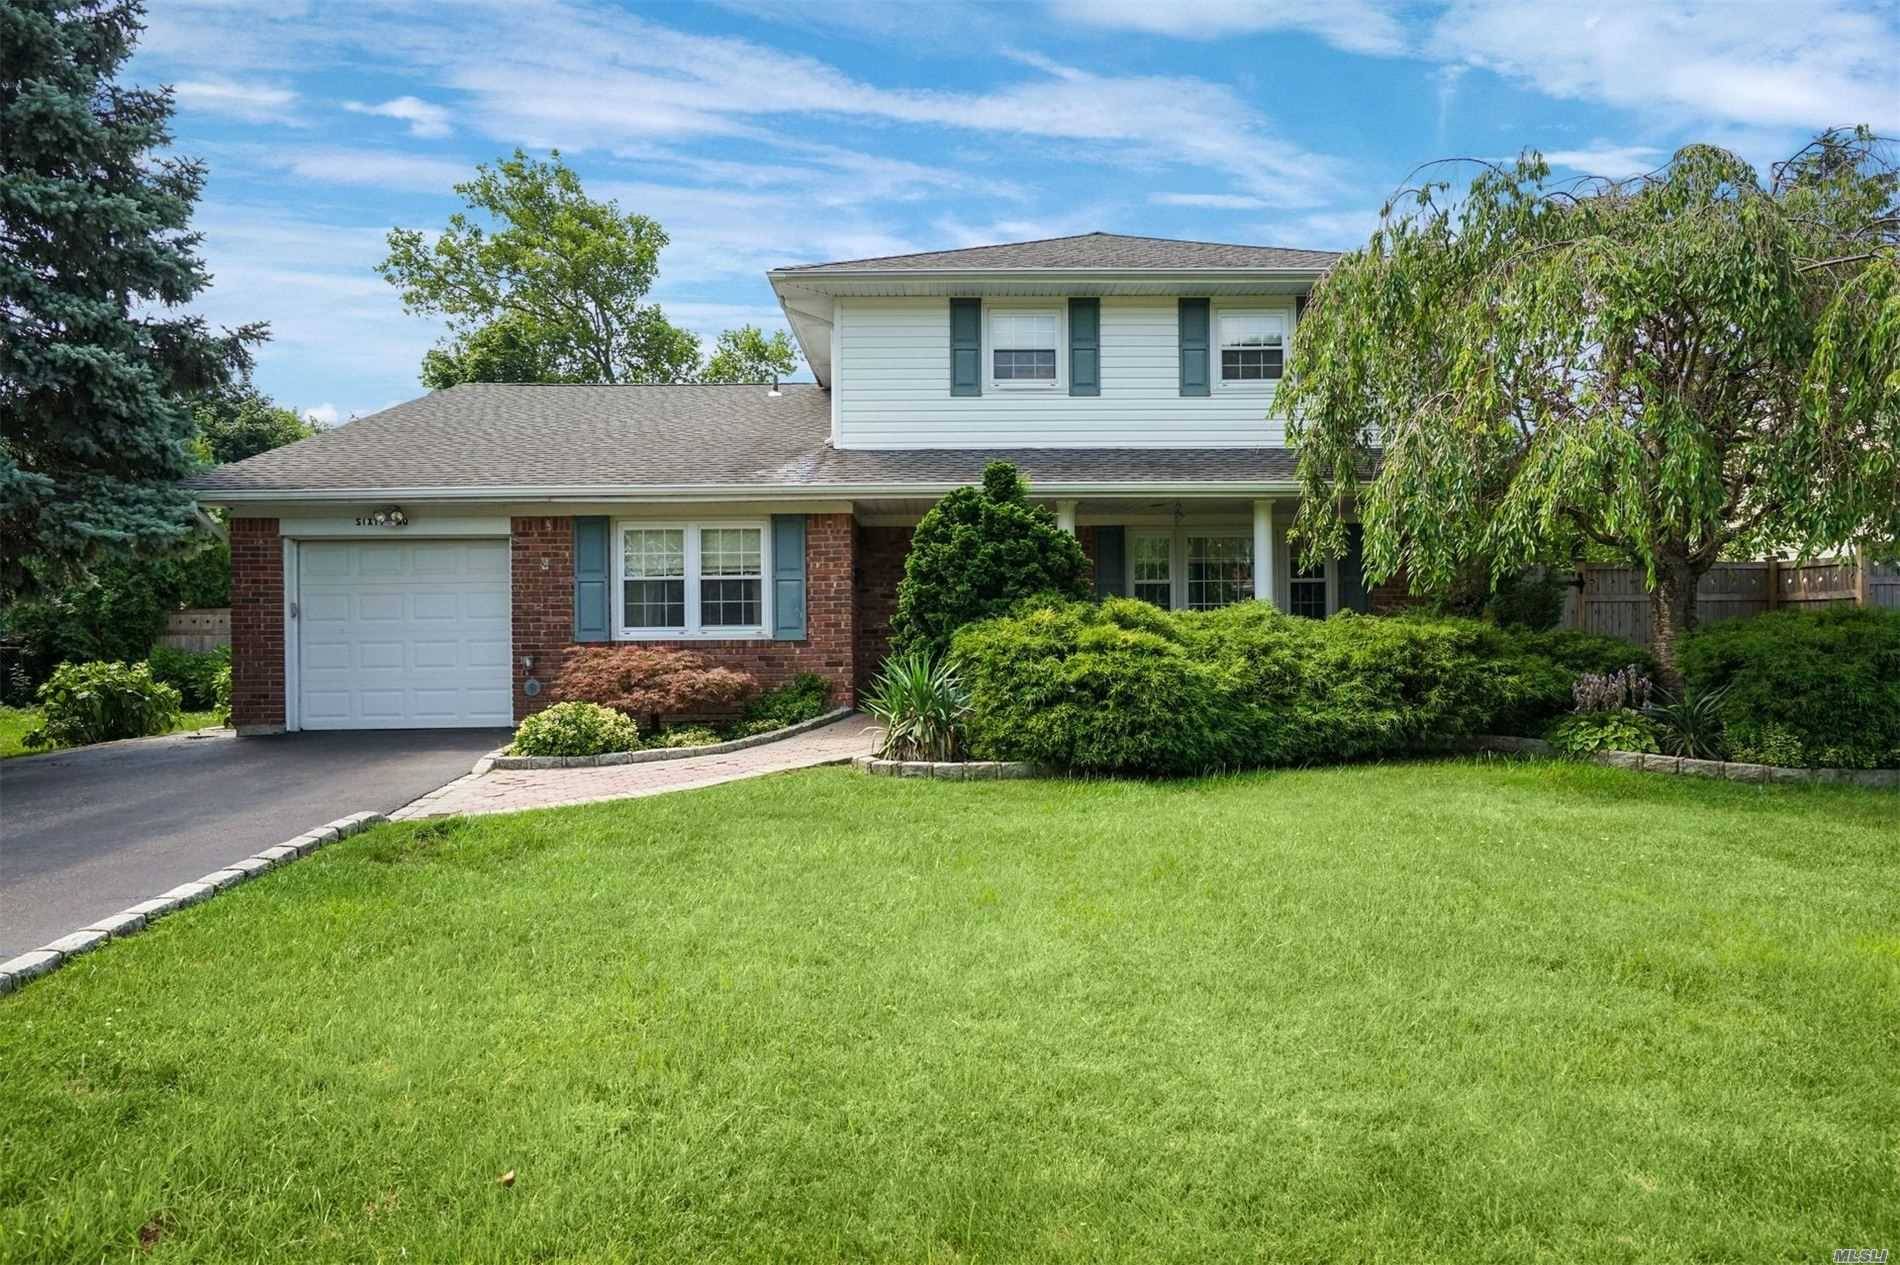 Beautifully Updated Home In The Heart Of Smithtown.